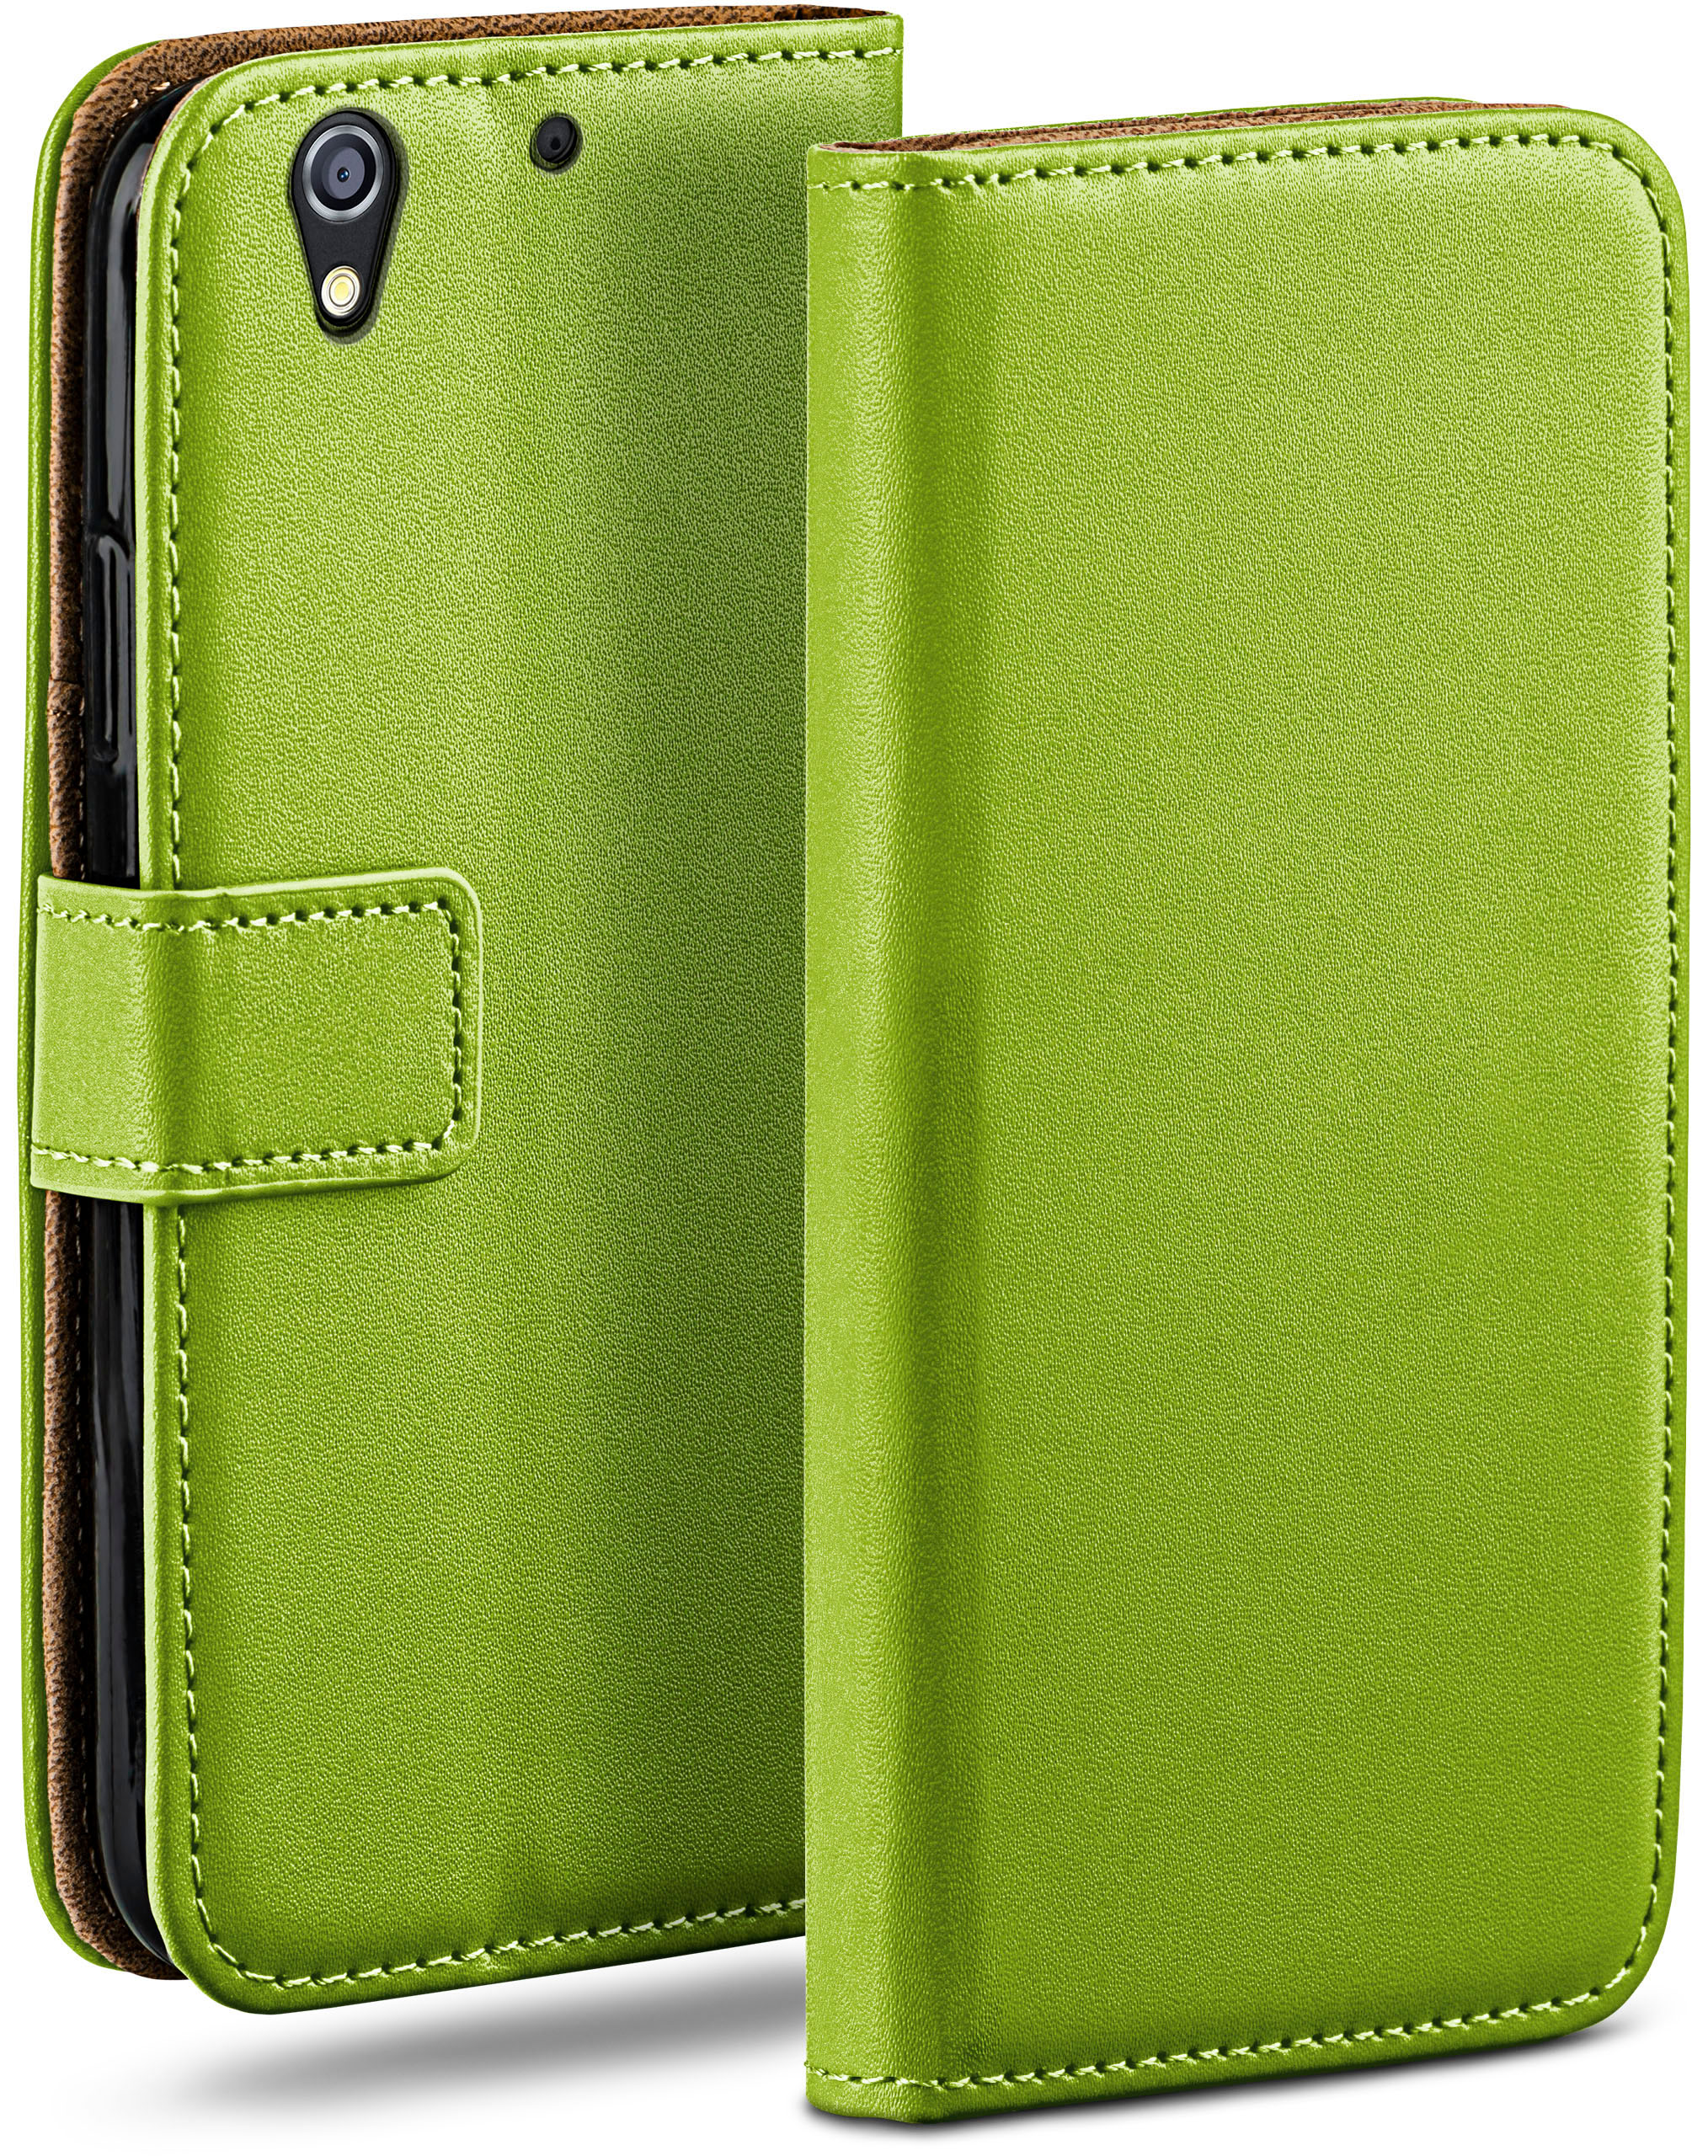 MOEX Book Case, 626G, Lime-Green Desire HTC, Bookcover